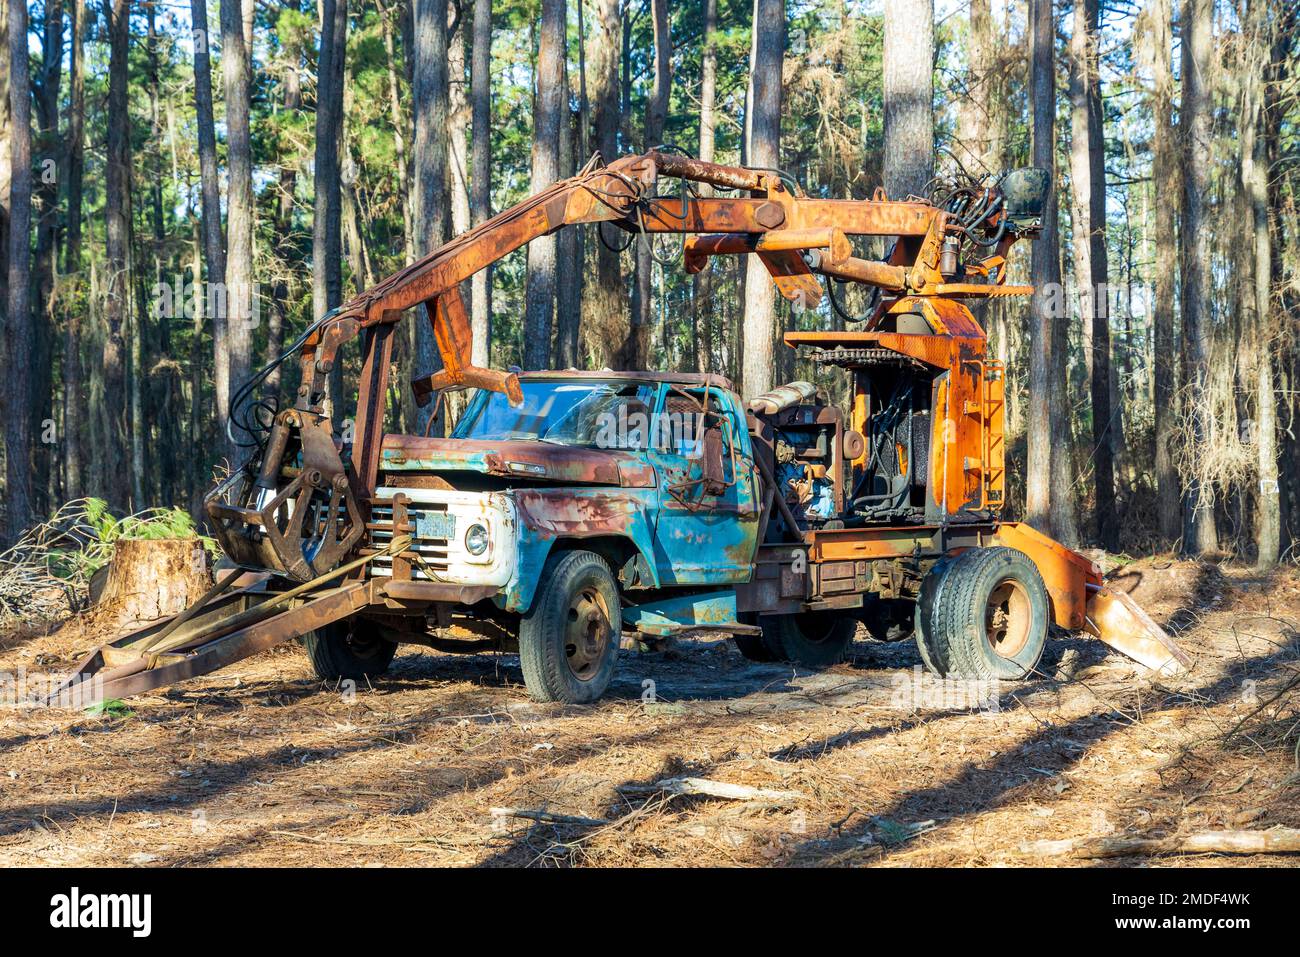 Abandoned non-working broken construction equipment in the forest near Caddo lake in Texas Stock Photo